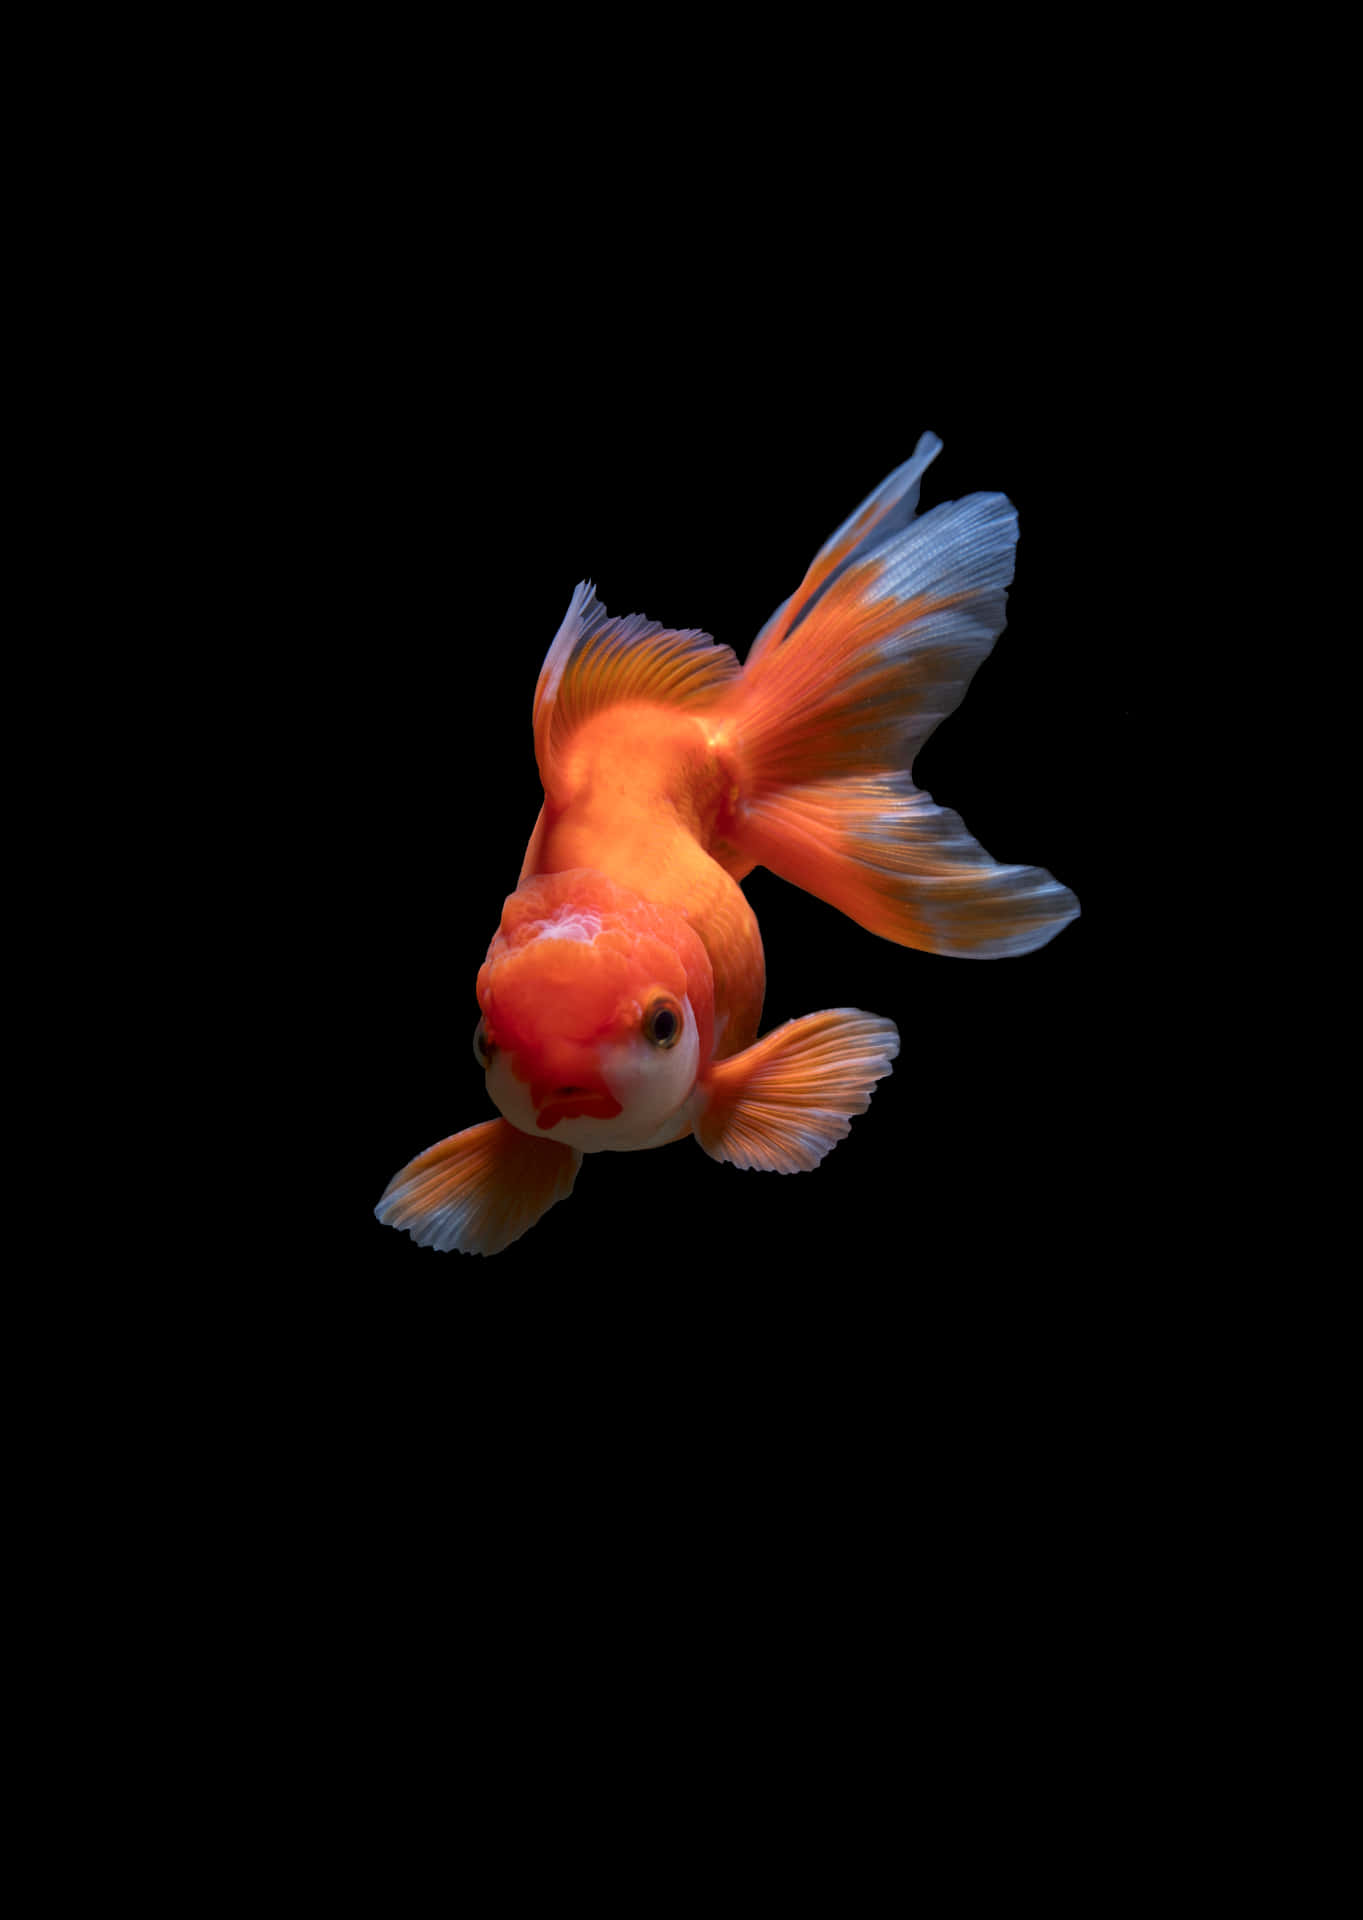 A Goldfish Swimming In A Black Background